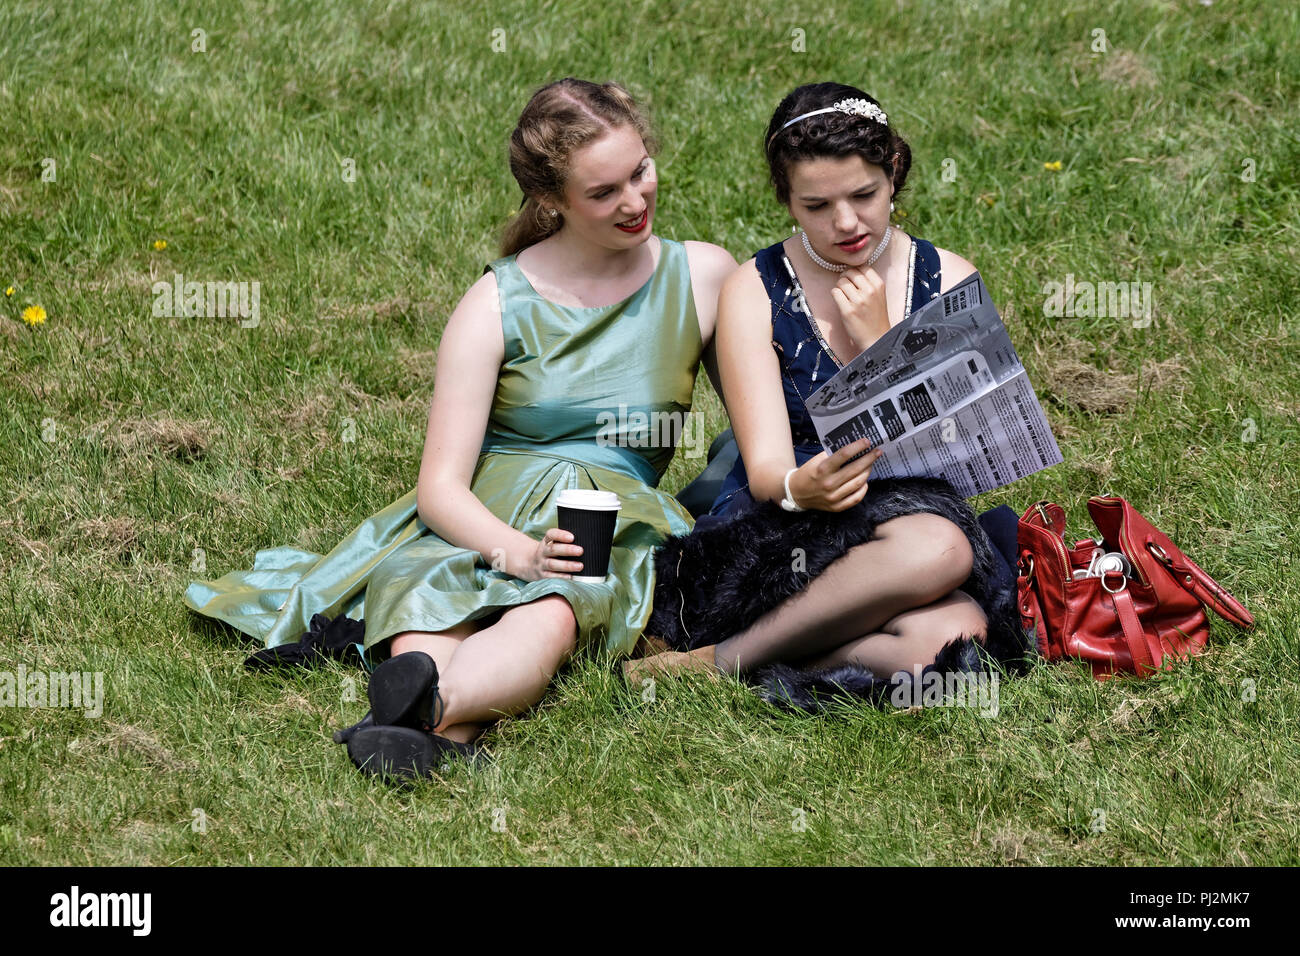 Two young women peruse a festival programme Stock Photo